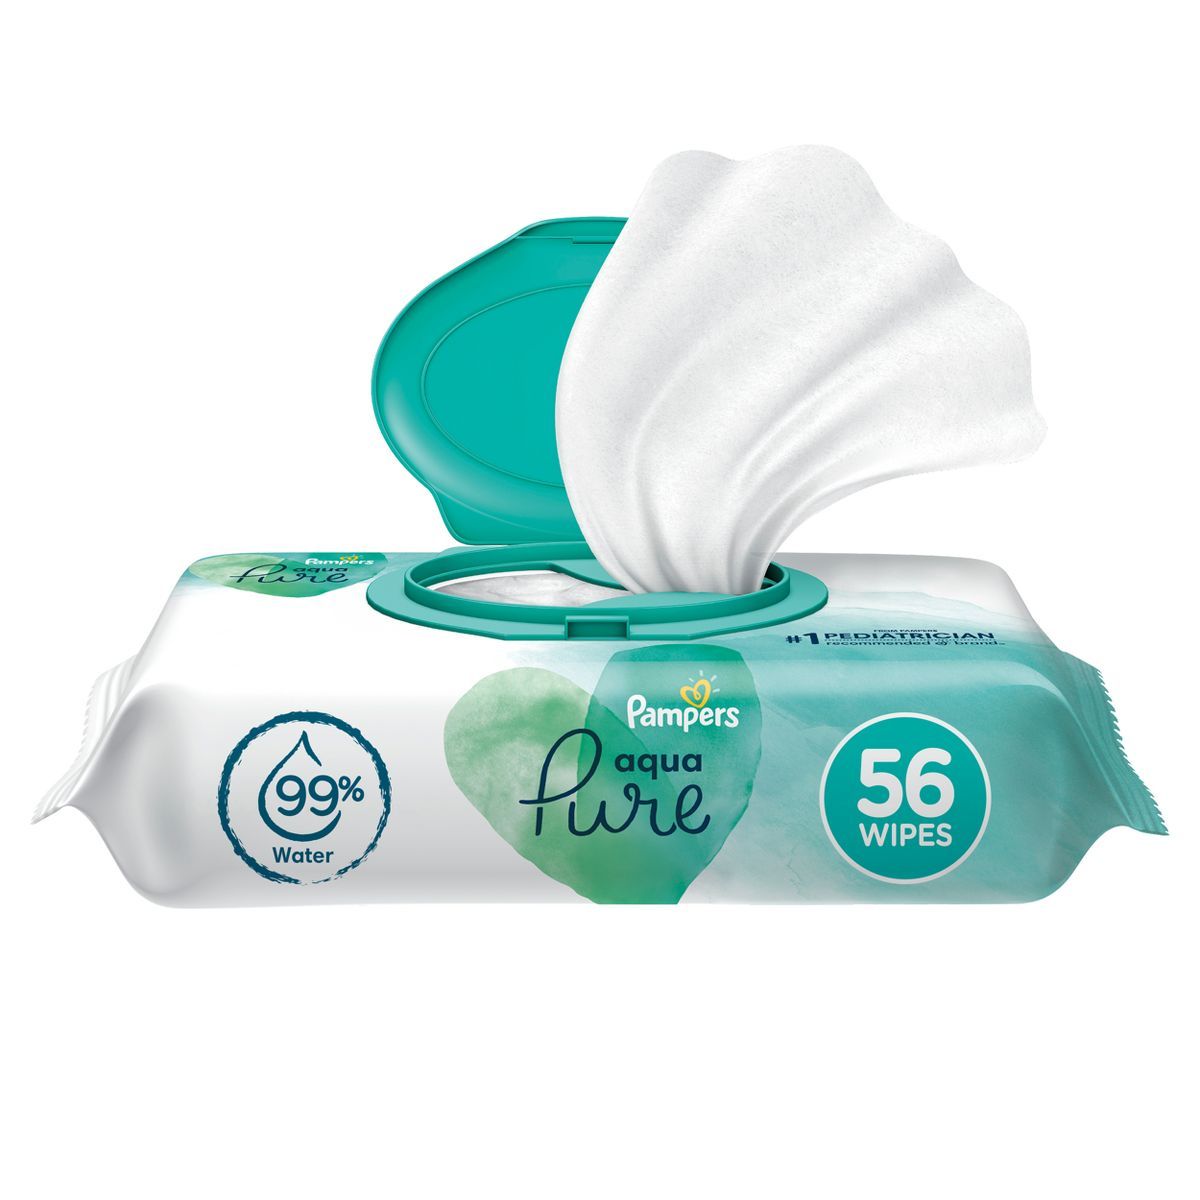 Pampers Aqua Pure Sensitive Baby Wipes (Select Count) | Target